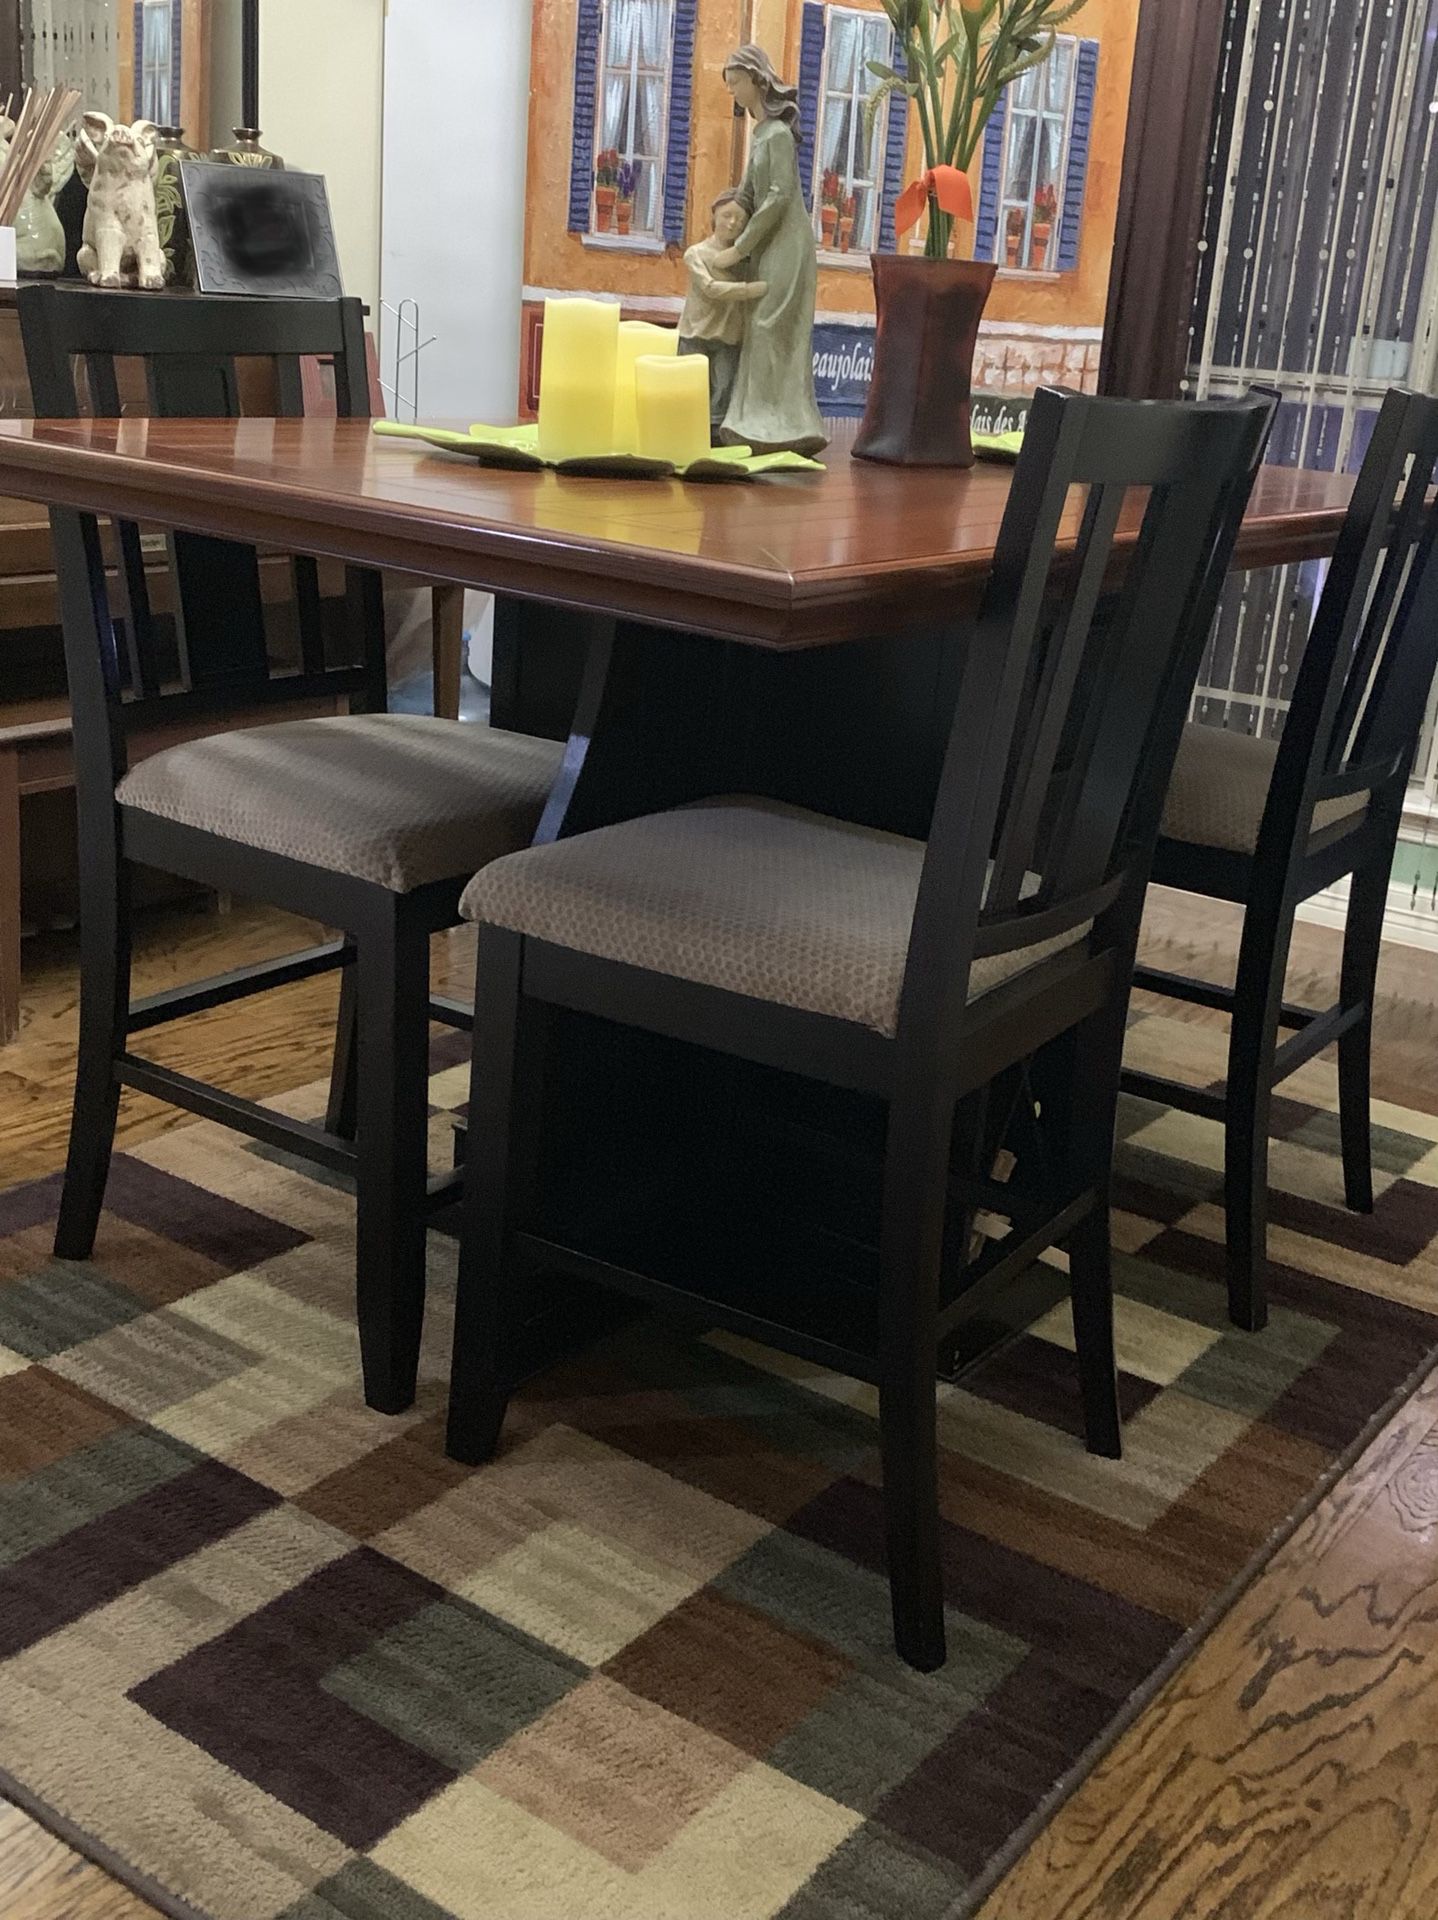 4 Chair Wooden Kitchen Table